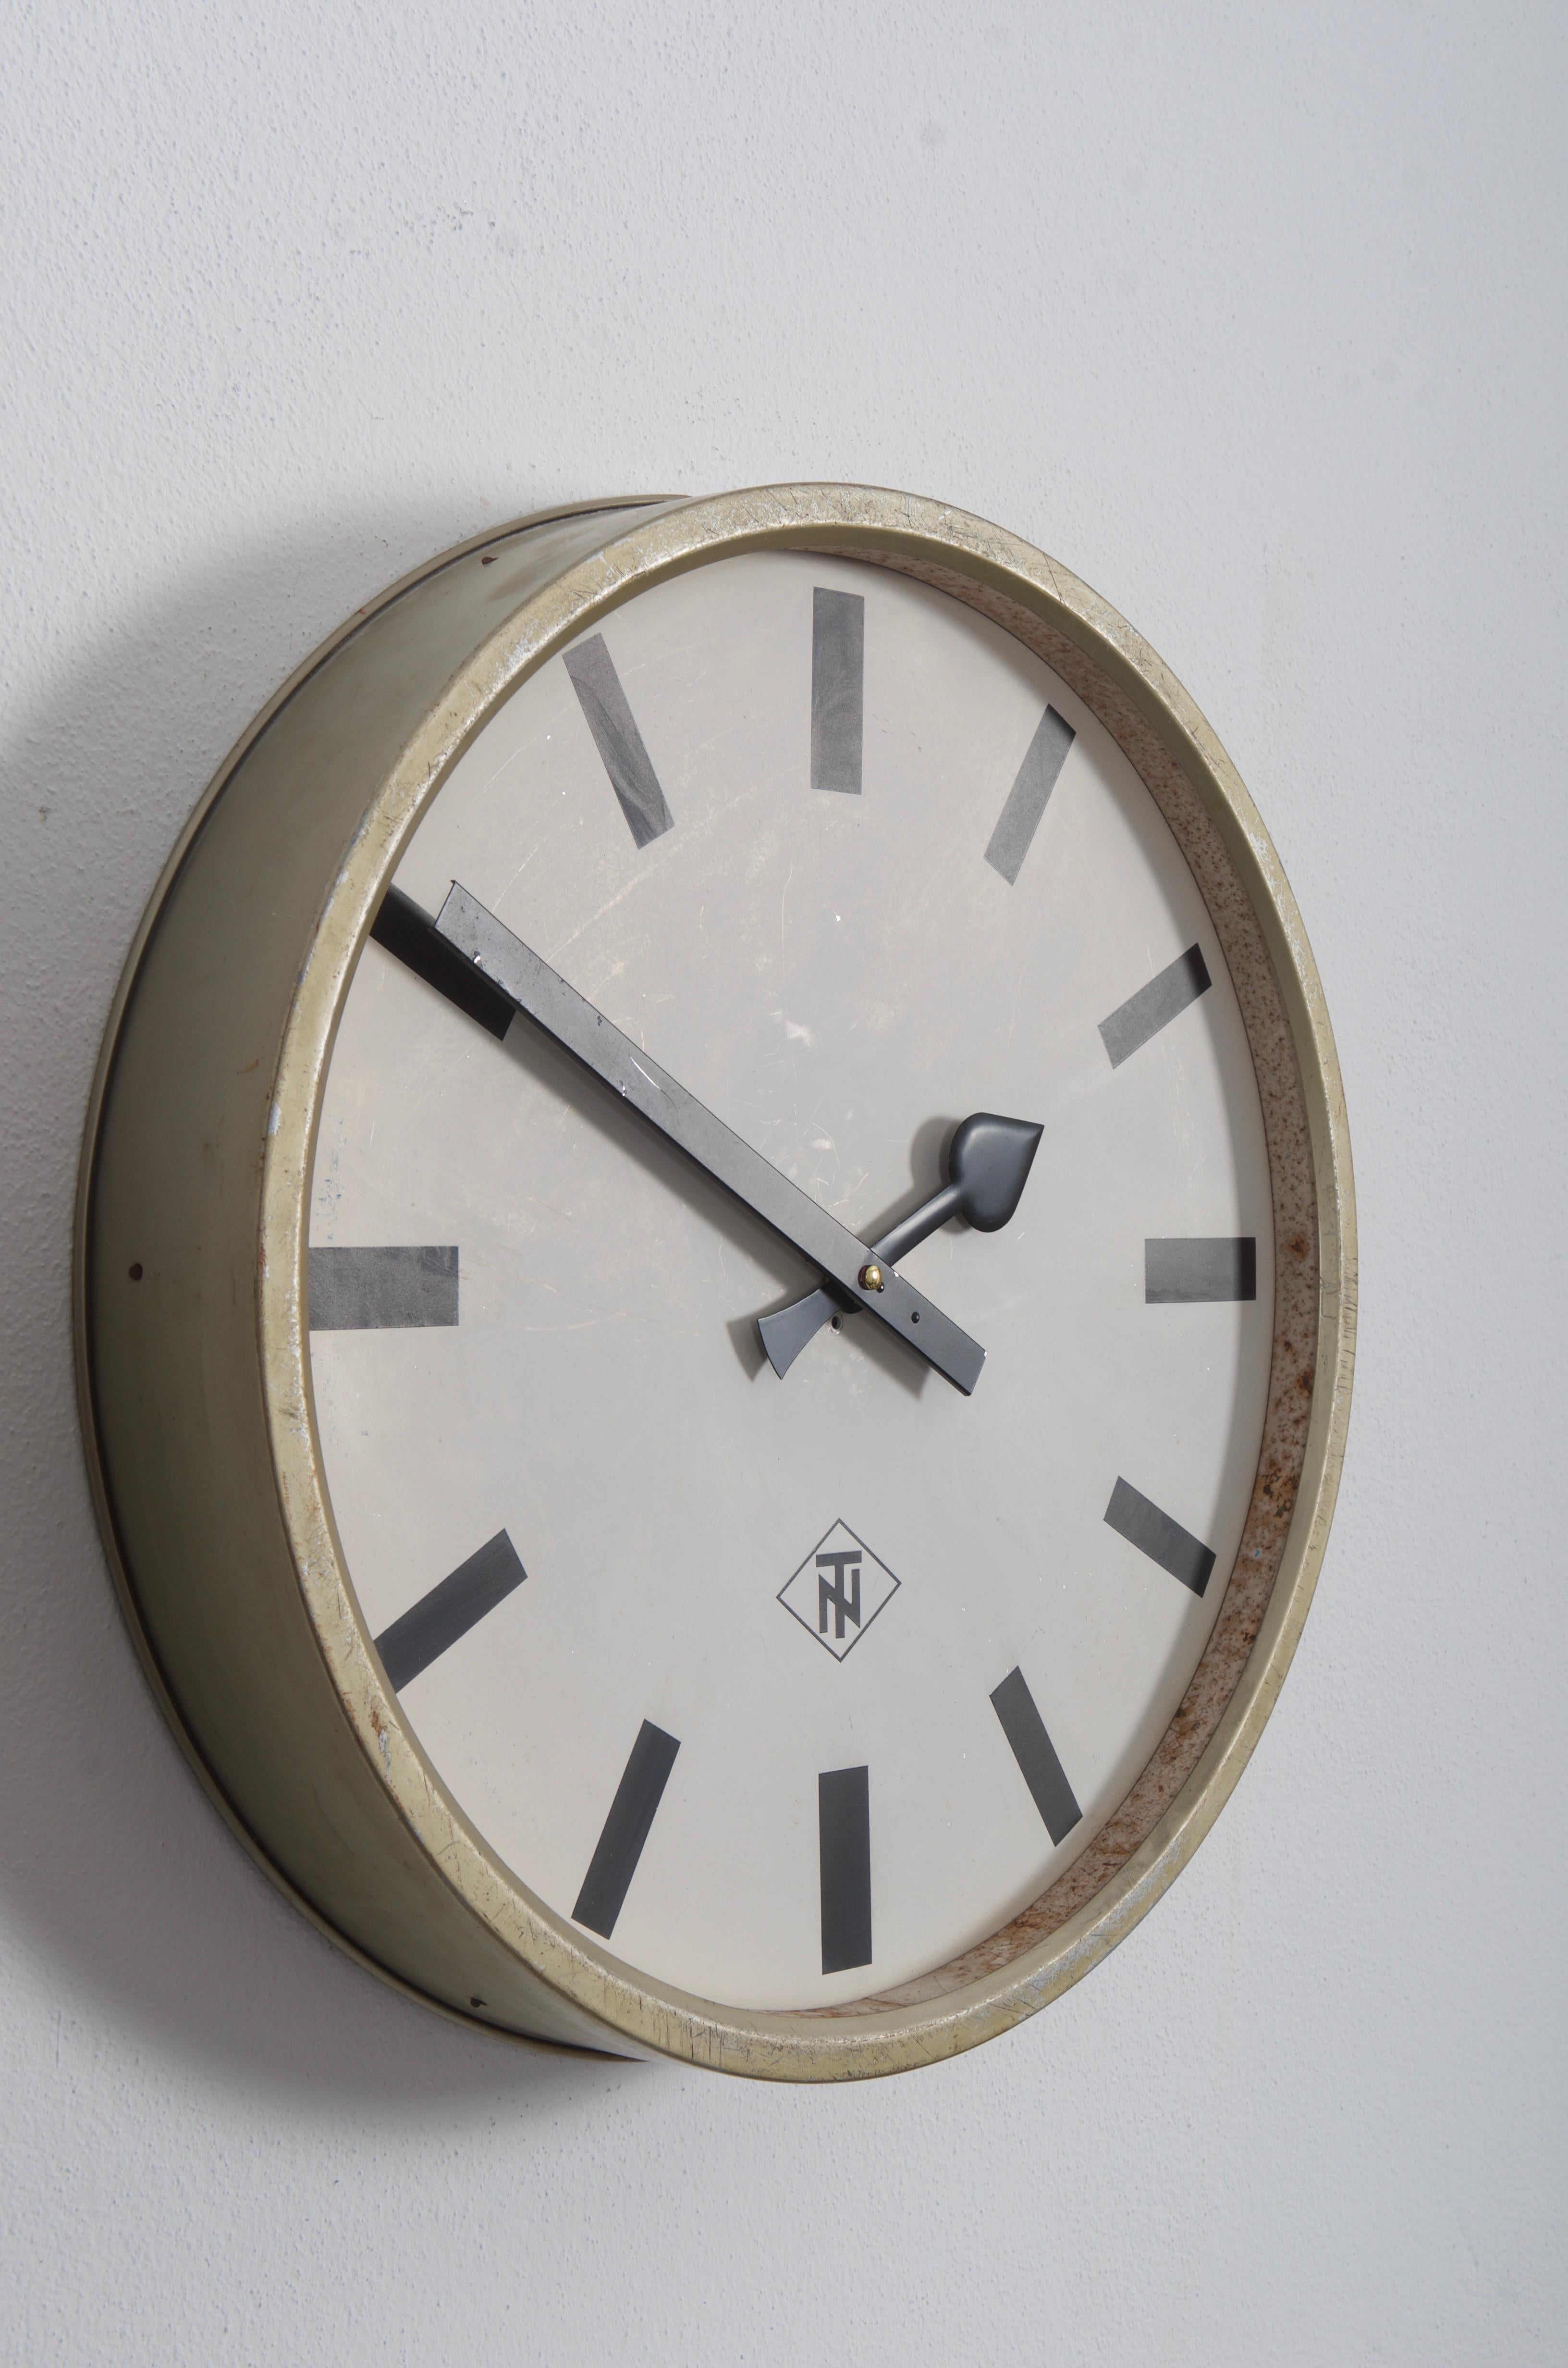 Steel frame painted with an aluminum clock face, clock hand and glass cover. Made in Germany in the late 1960s by TN (Telefonbau und Normalzeit). Formerly a slave clock, it is now fitted with a modern quartz movement with an AA battery. Some use